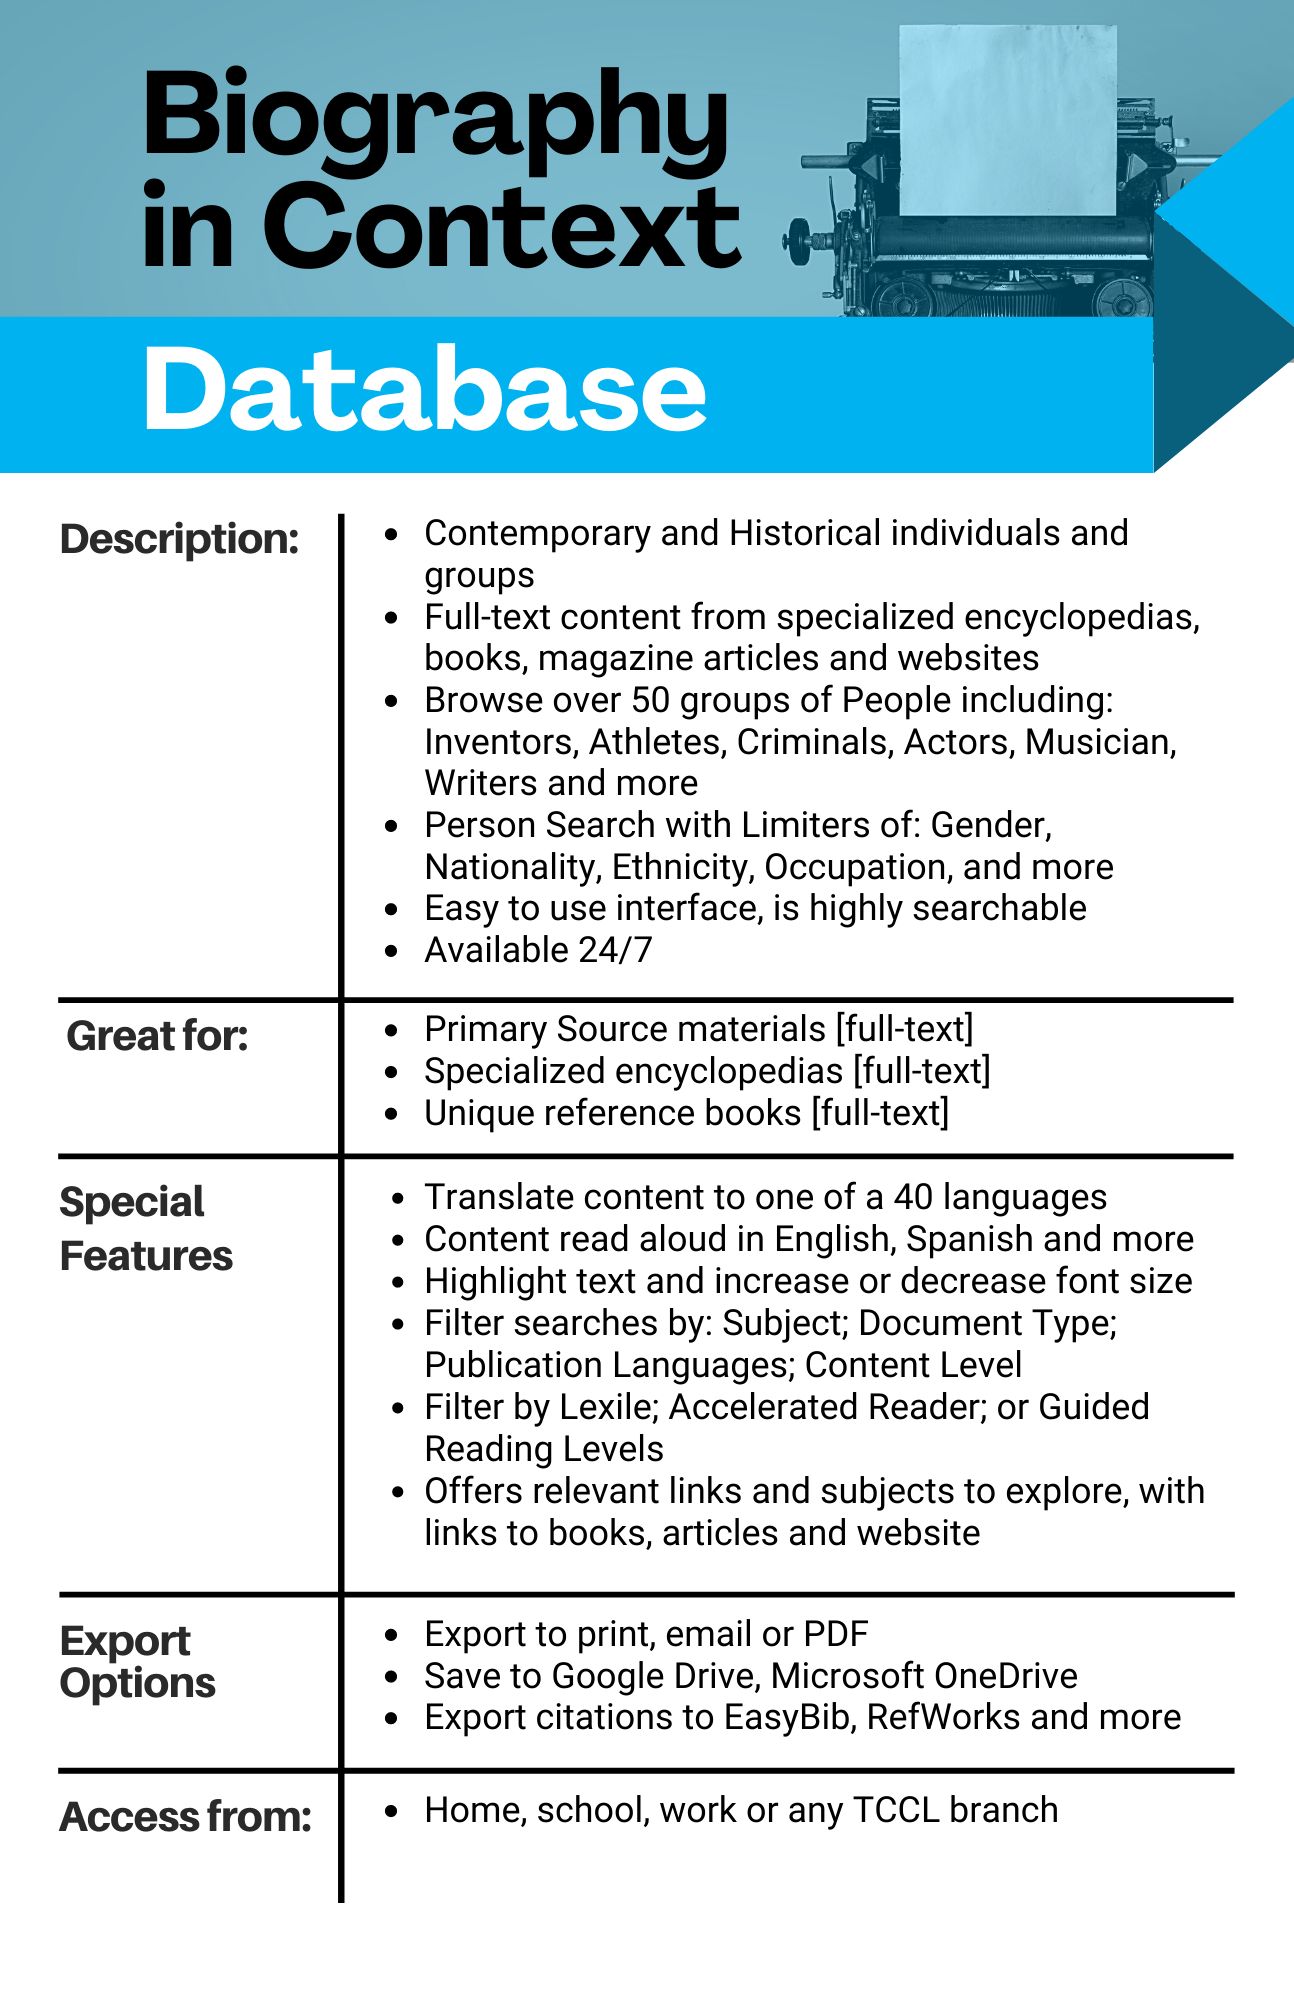 Description of services and resources available through the online database Biography in Context